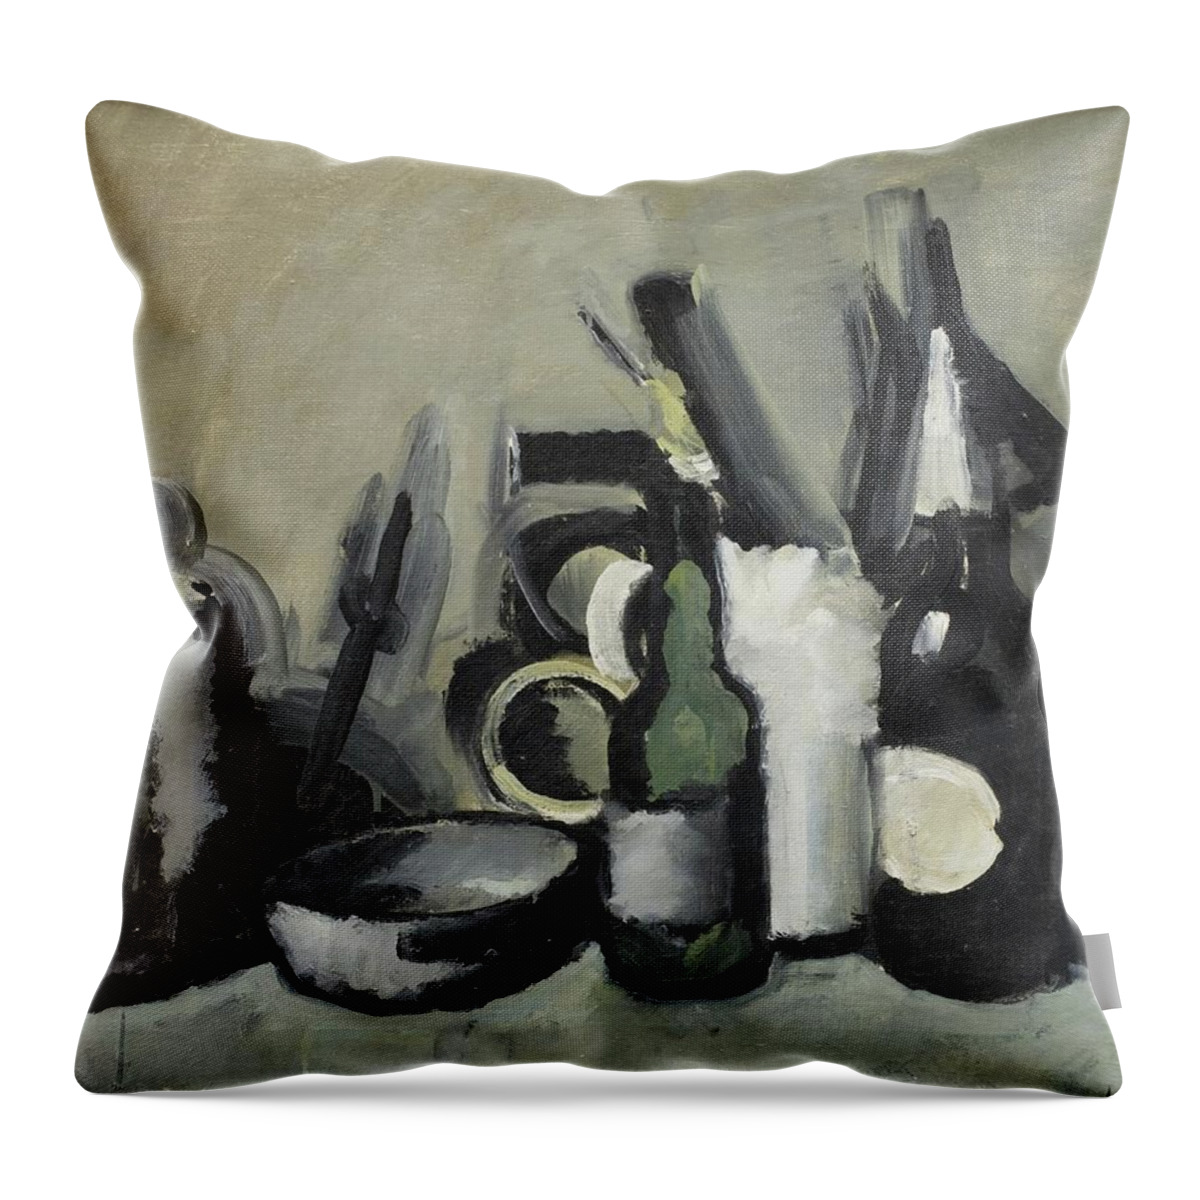 Still Life Throw Pillow featuring the painting Still Life With Bottle by Harald Giersing